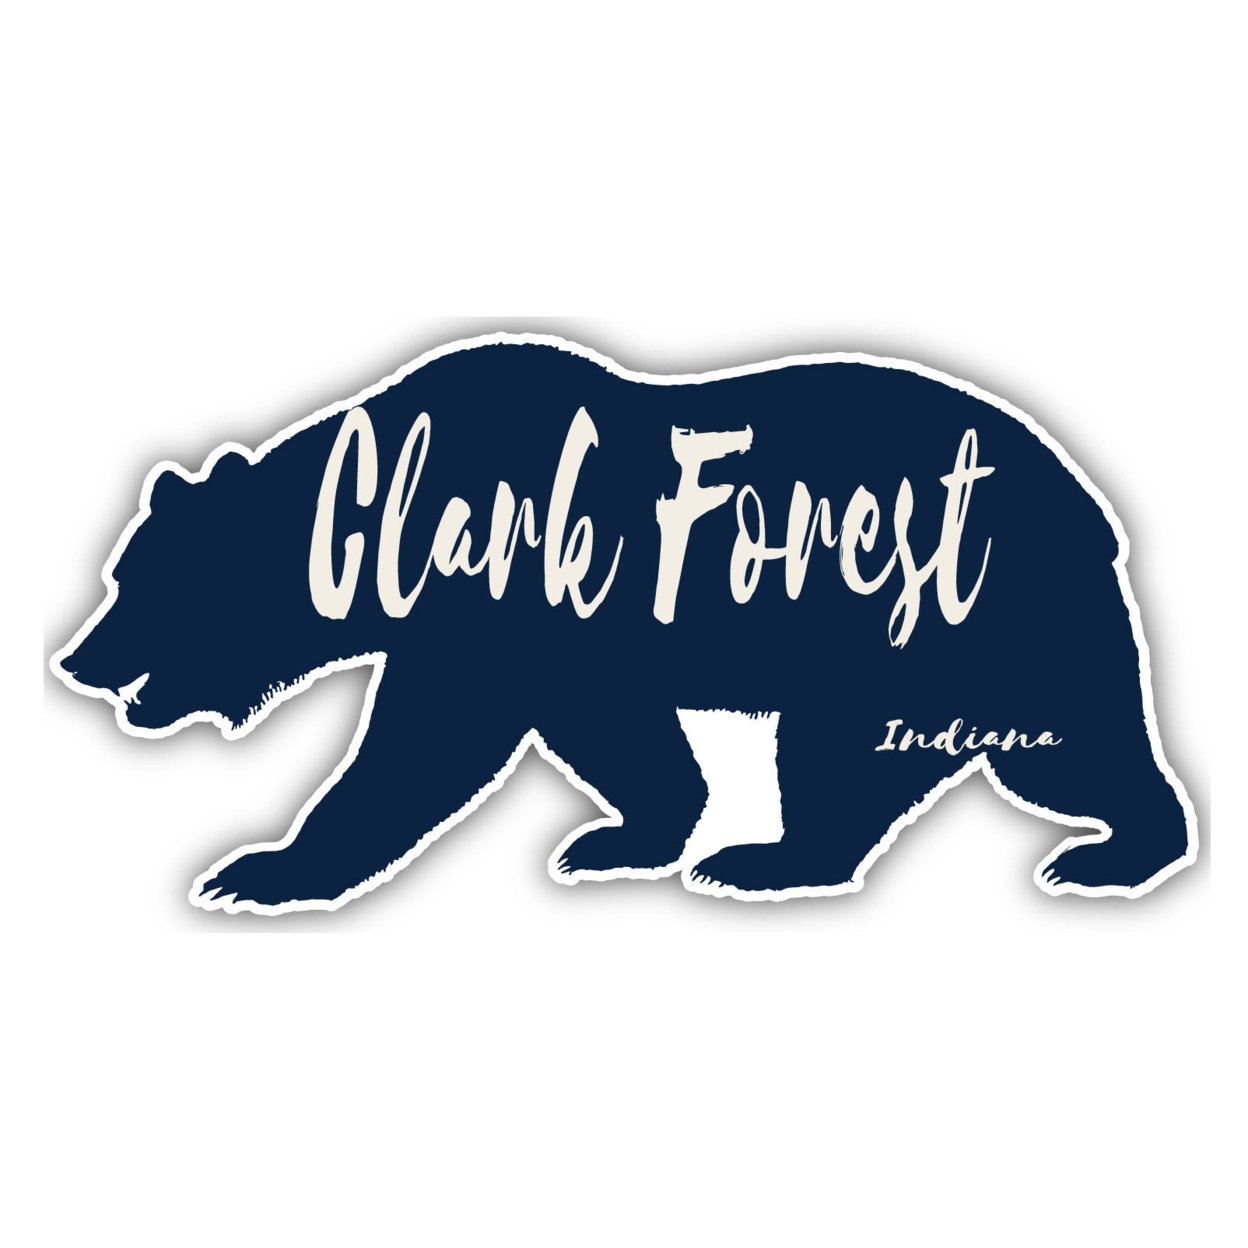 Clark Forest Indiana Souvenir Decorative Stickers (Choose Theme And Size) - Single Unit, 4-Inch, Bear